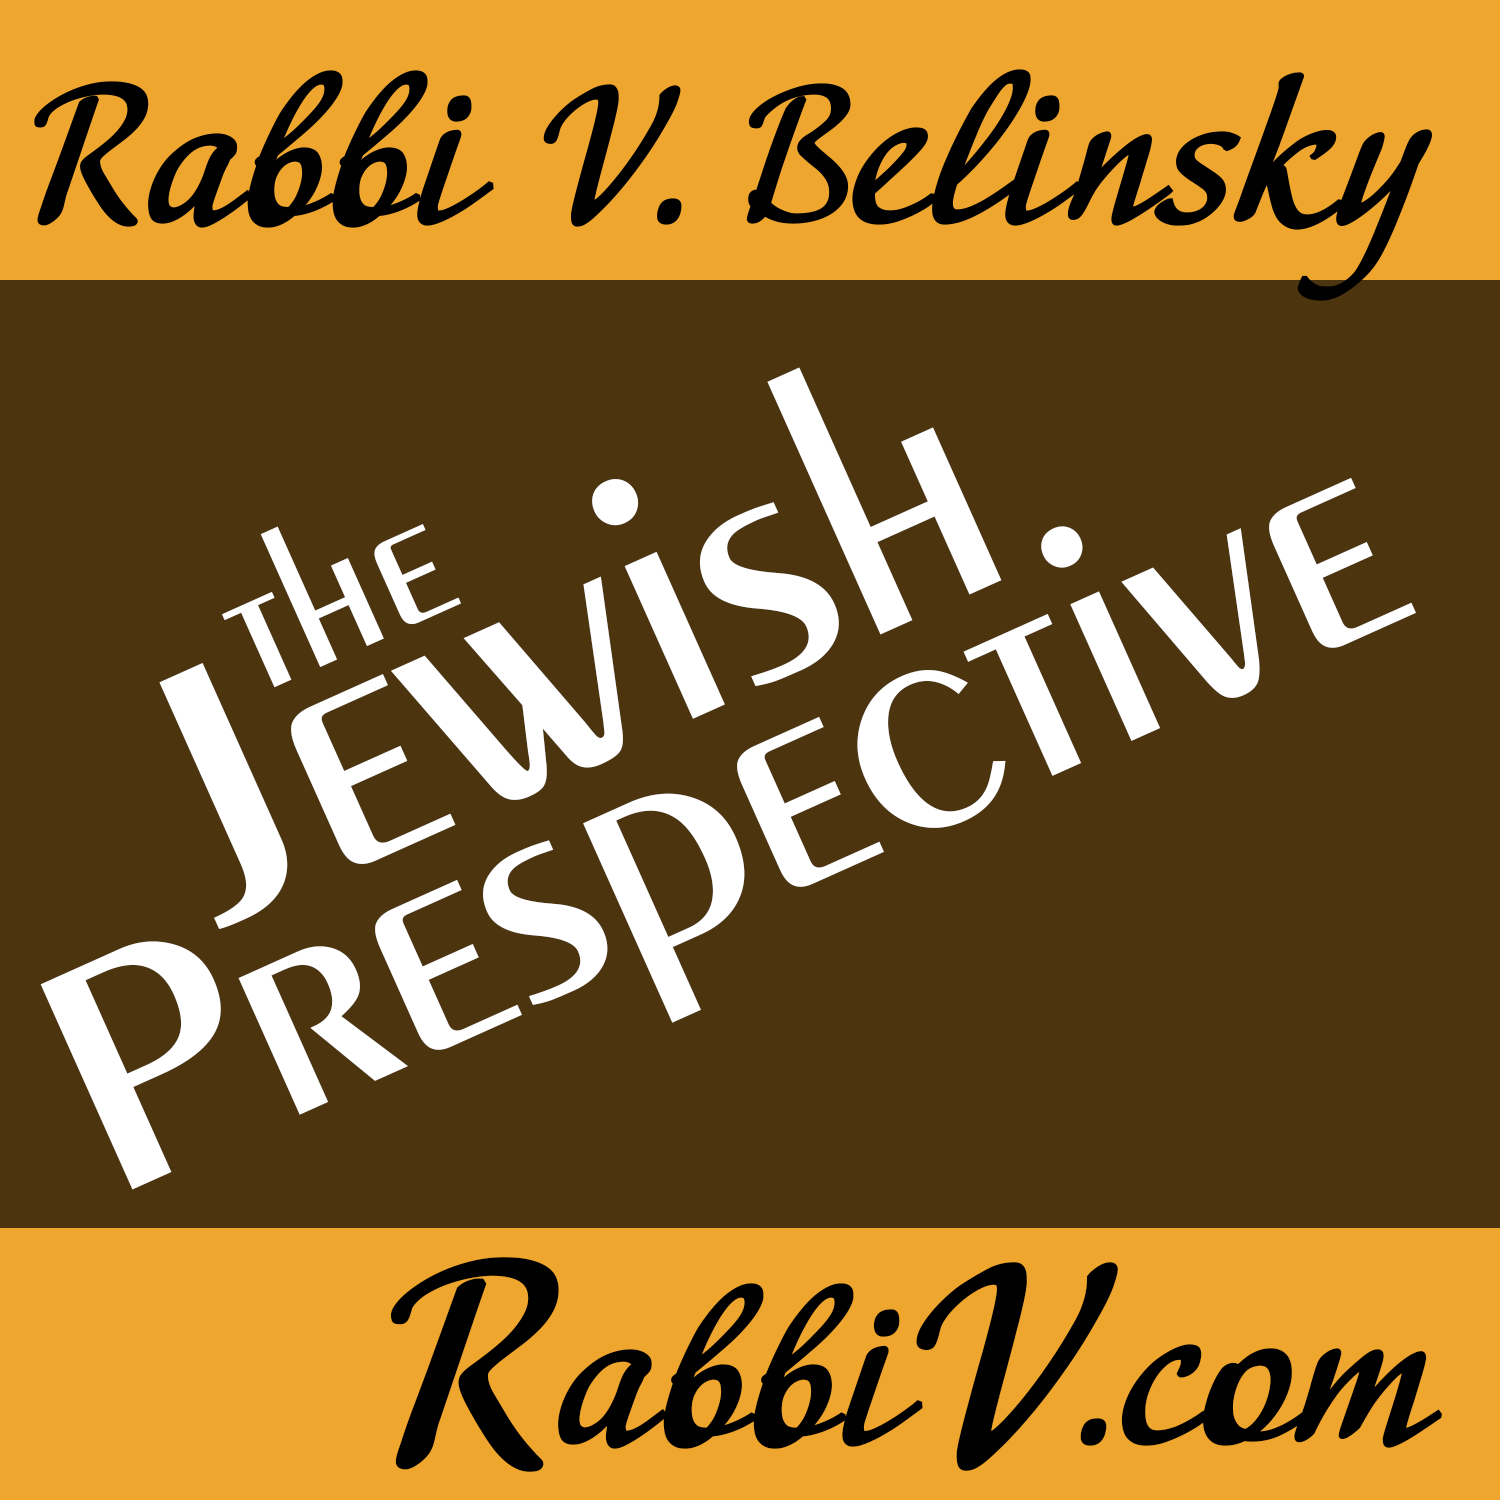 Abortion for a victim of rape - The Torah's view